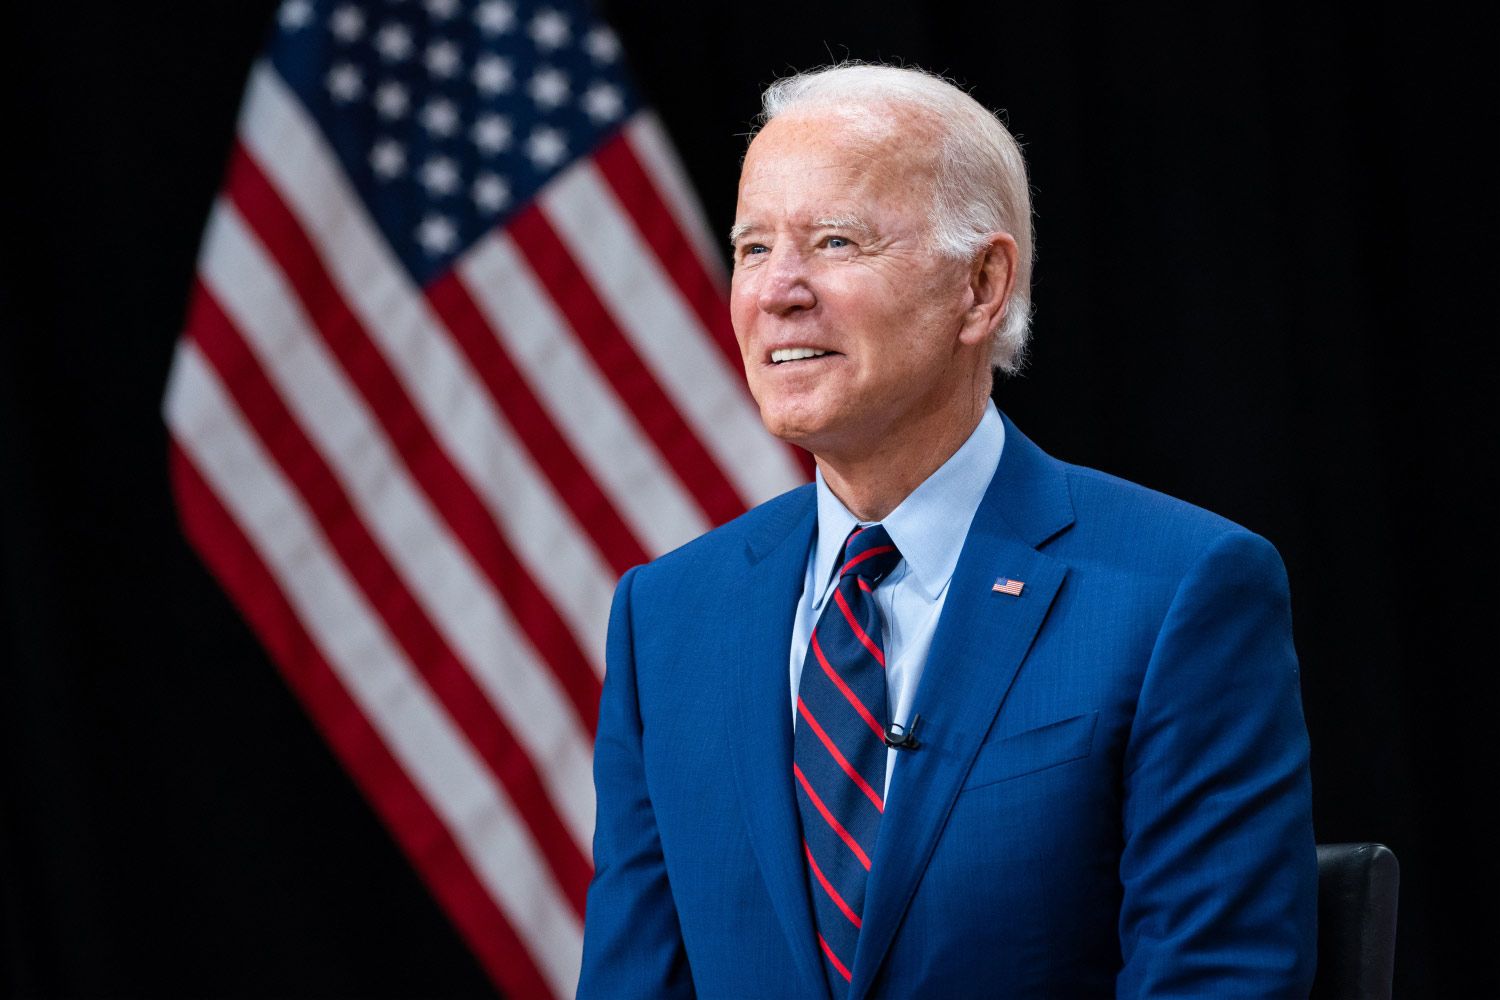 Joe Biden Promised To Revitalize Unions. How’s That Going?